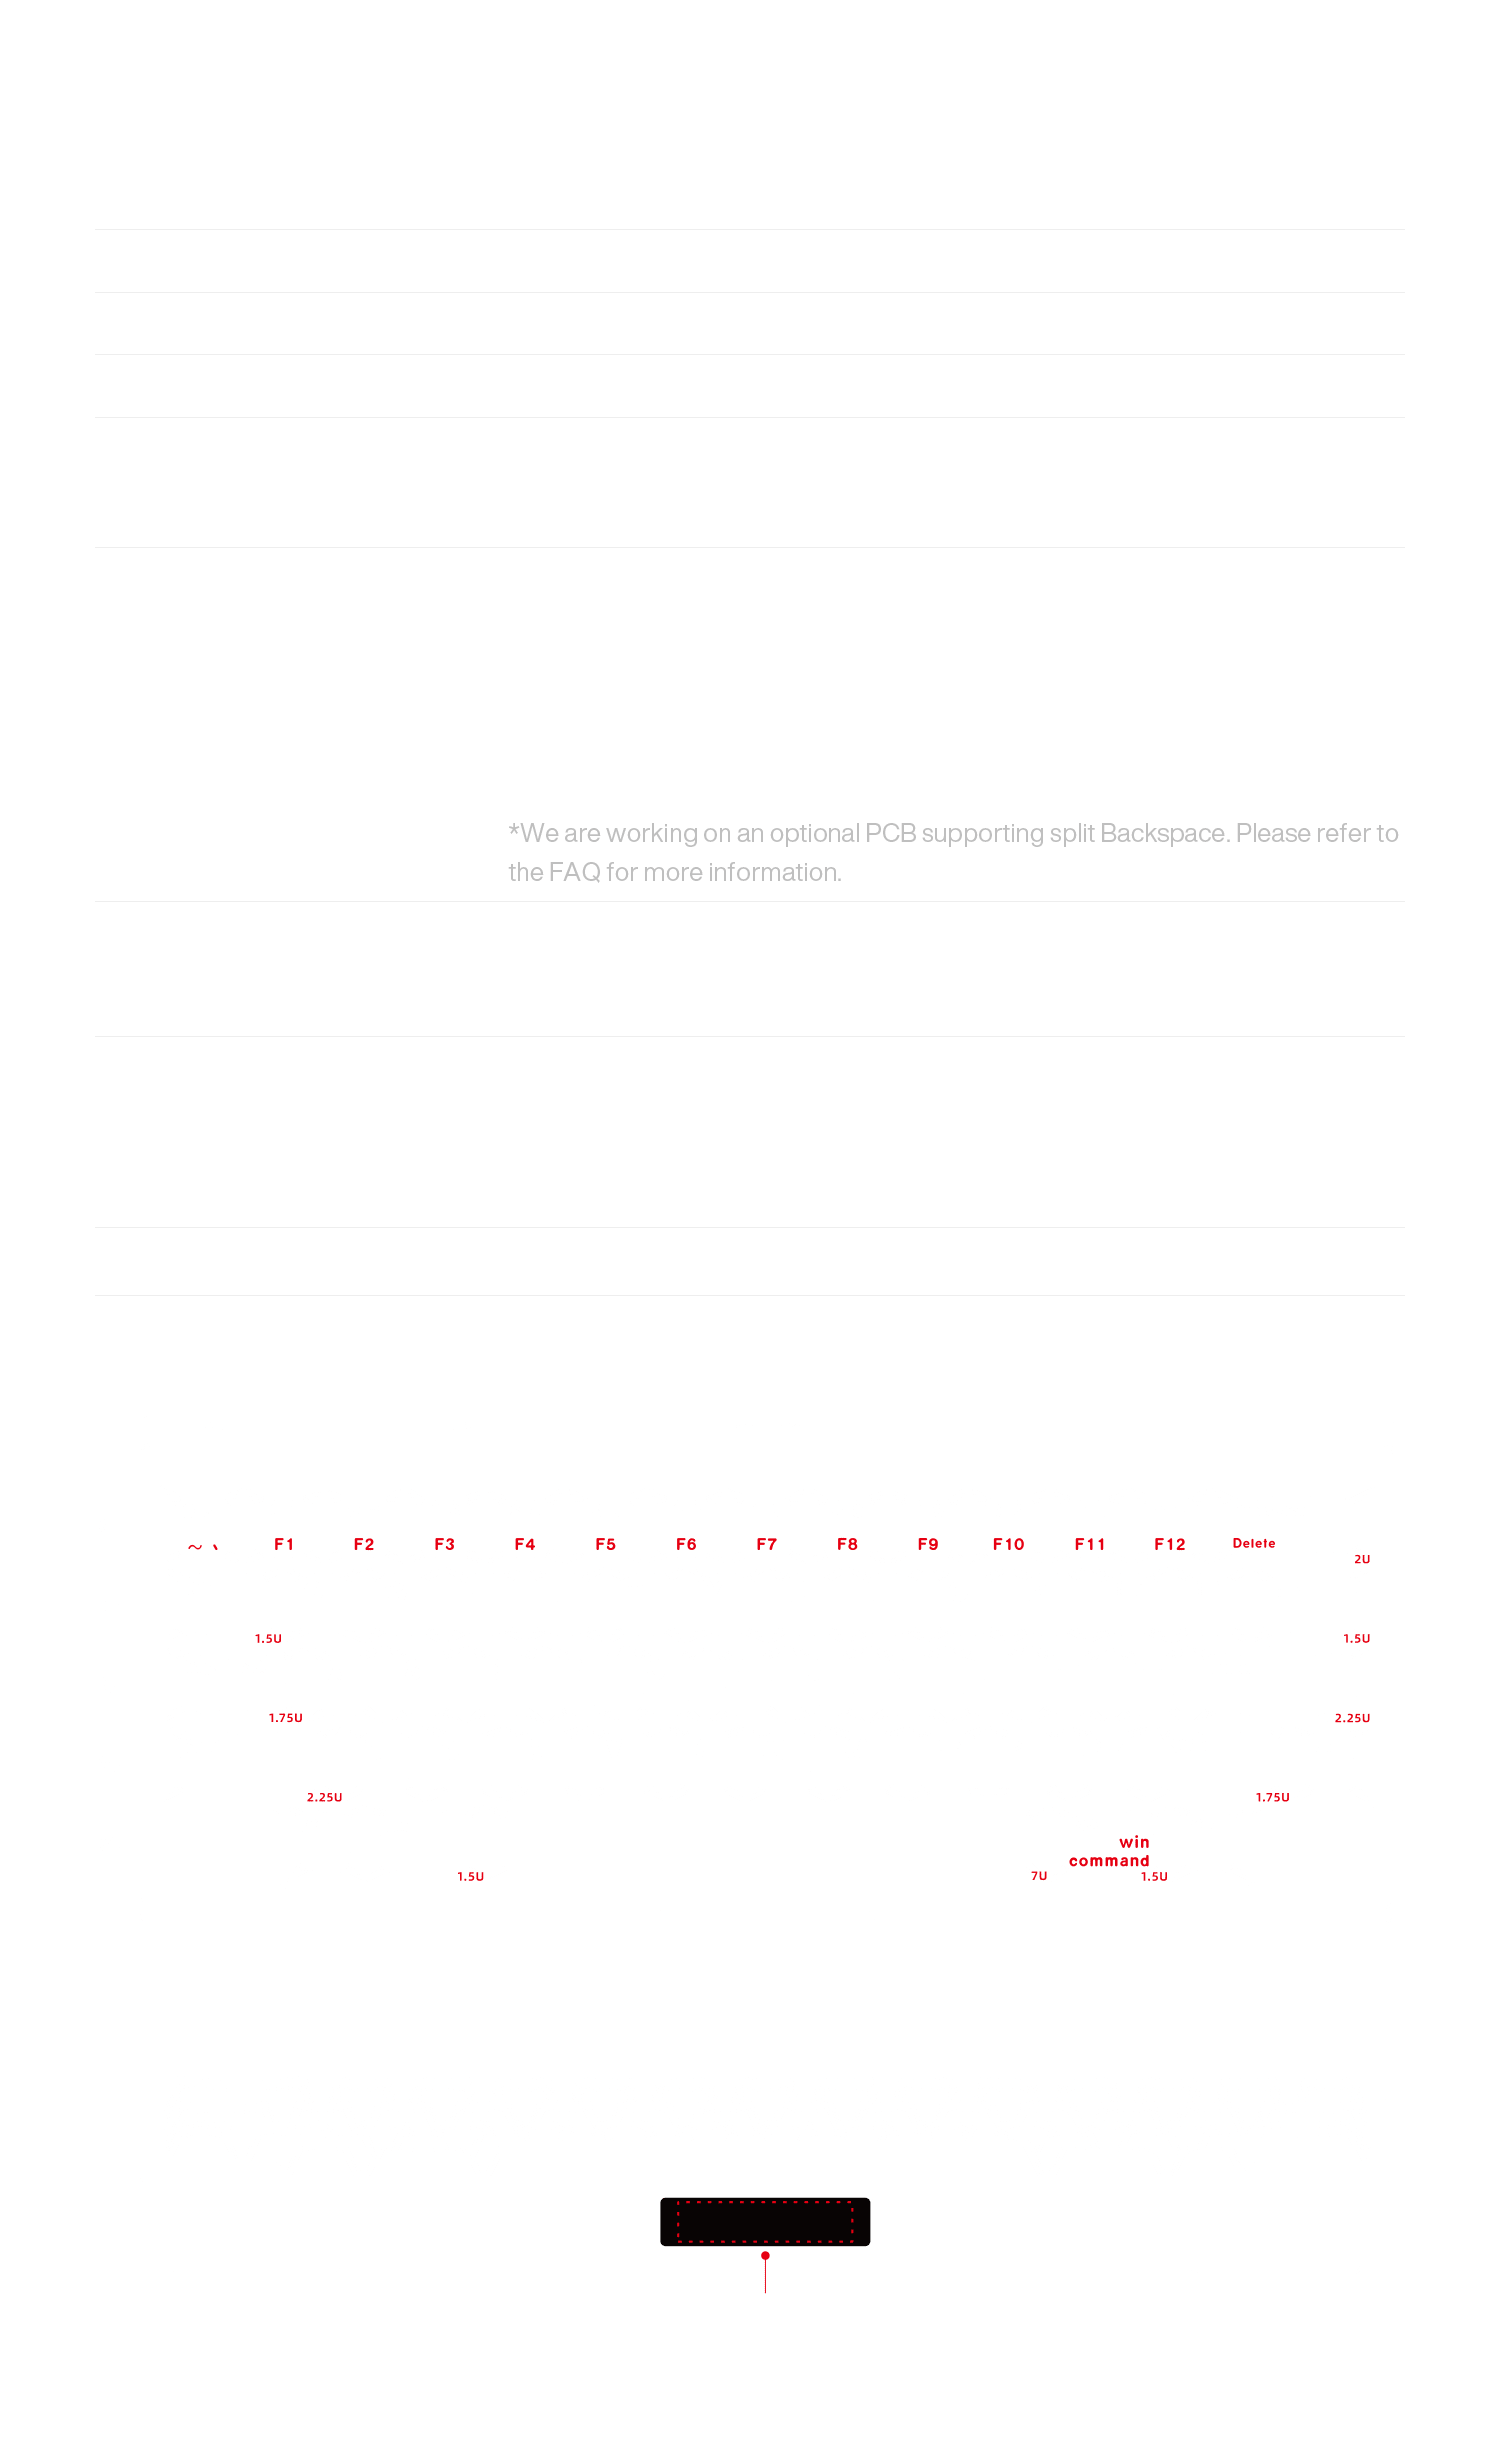 New Angry Miao layout - more compact than 65% and more practical